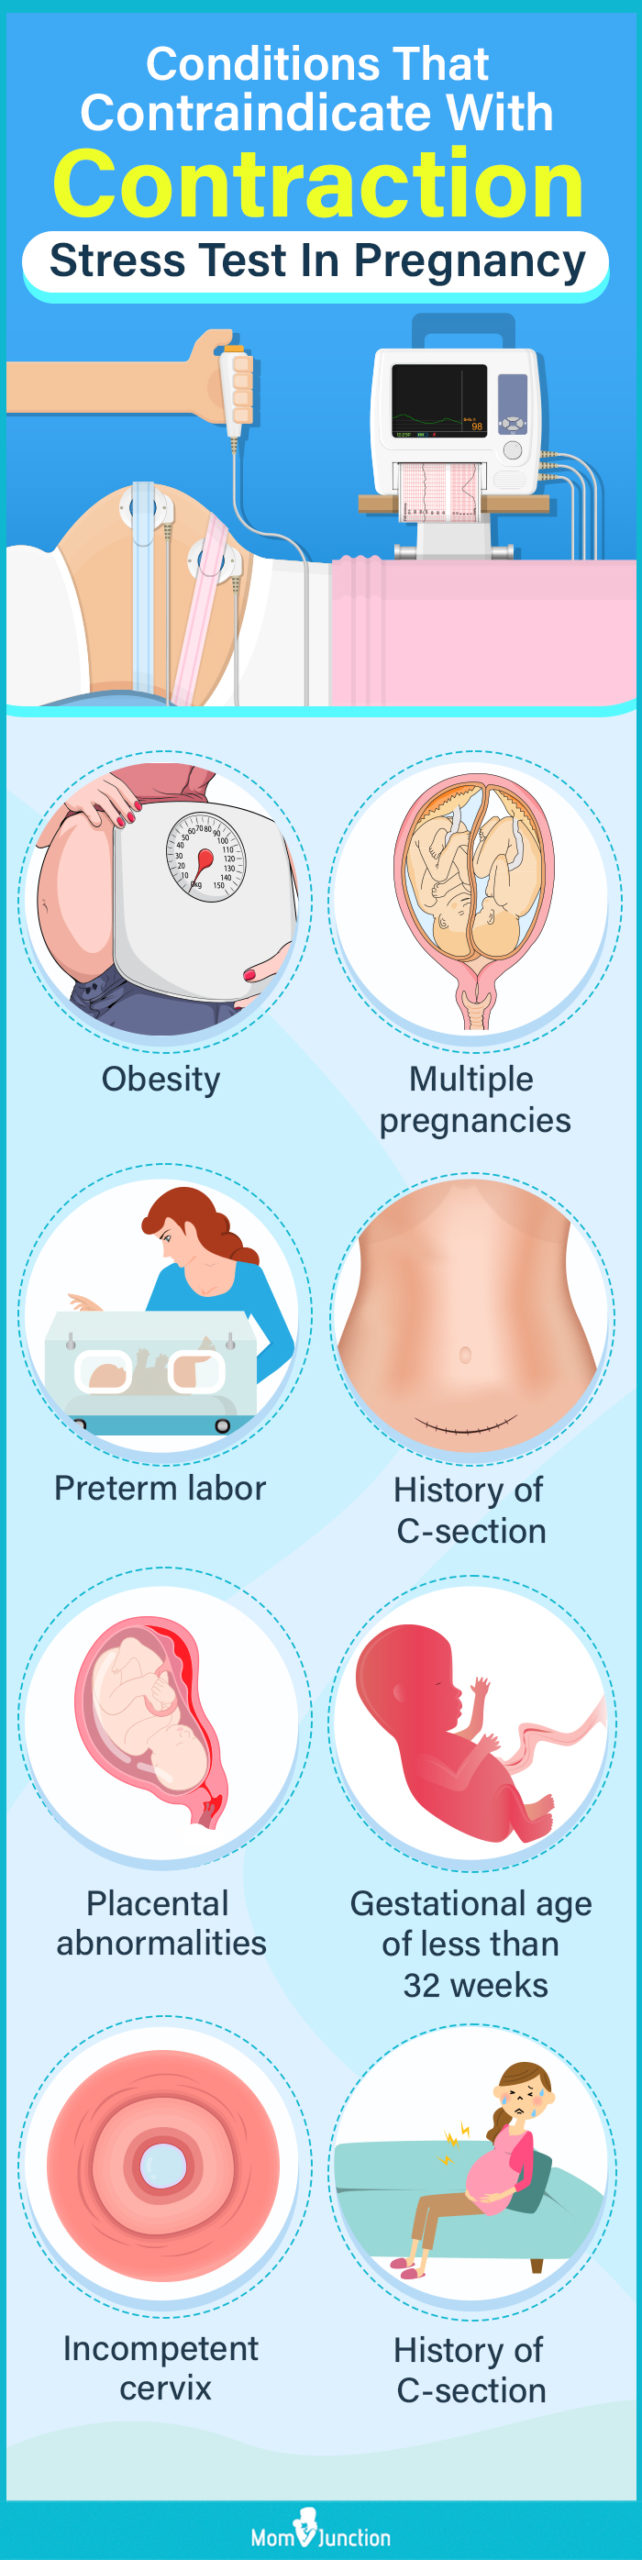 conditions that contraindicate with contraction stress test in pregnancy (infographic)